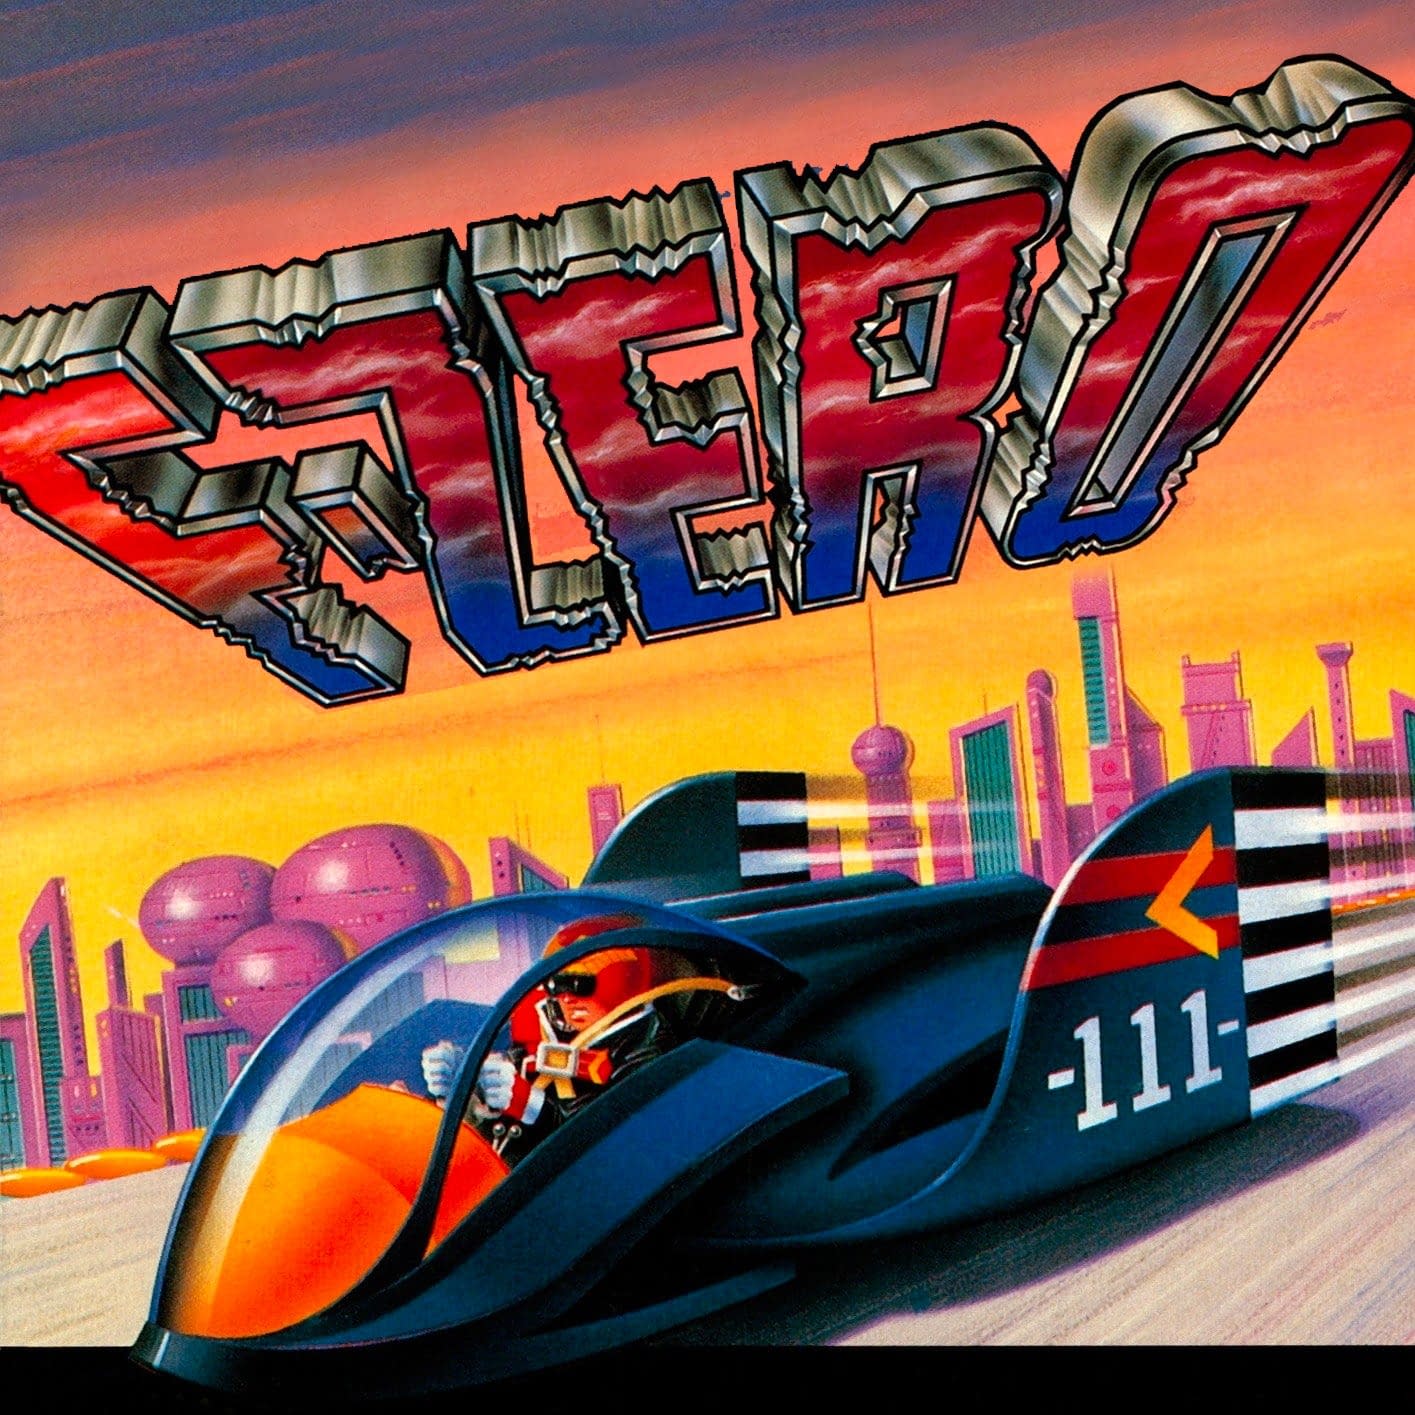 From The Rumor Mill Is There A New FZero Game On The Way?